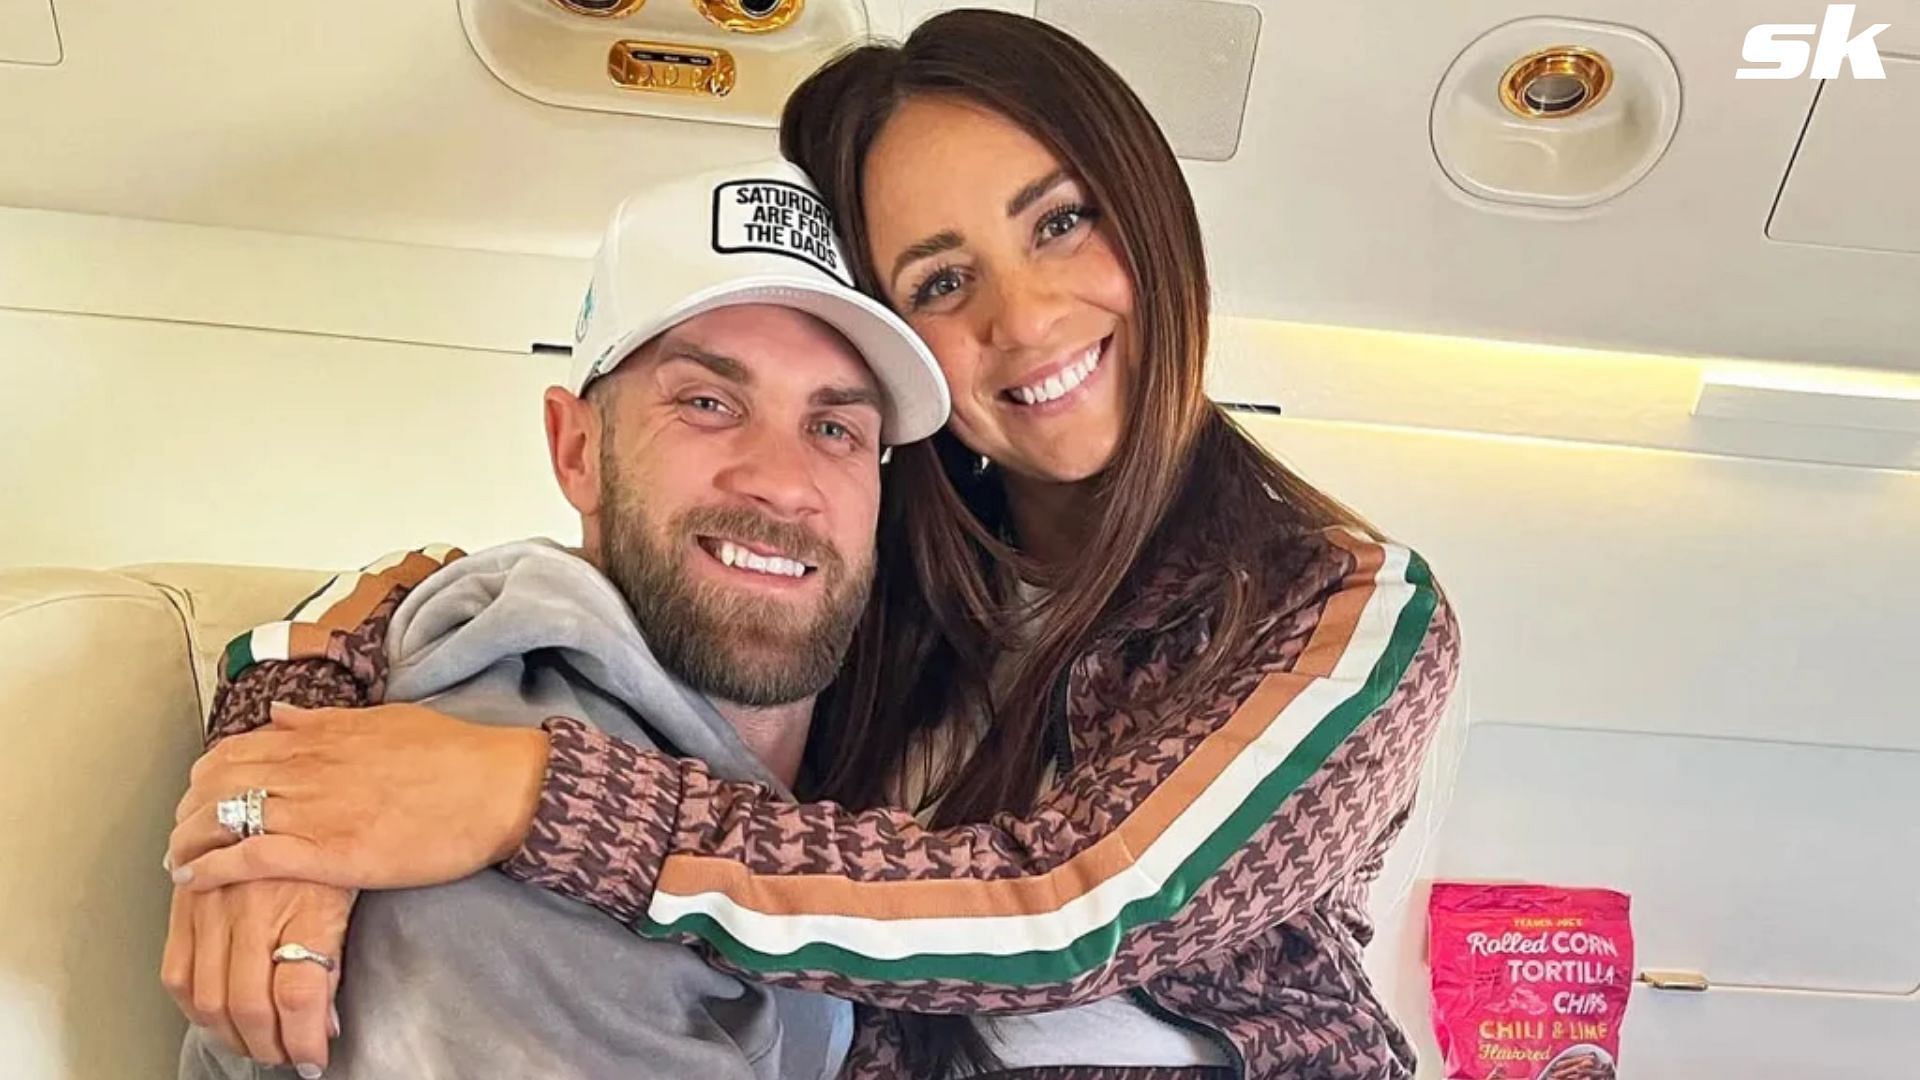 Bryce Harper's wife blasts 'classless' Washington Nationals fans for  heckling about their infant son